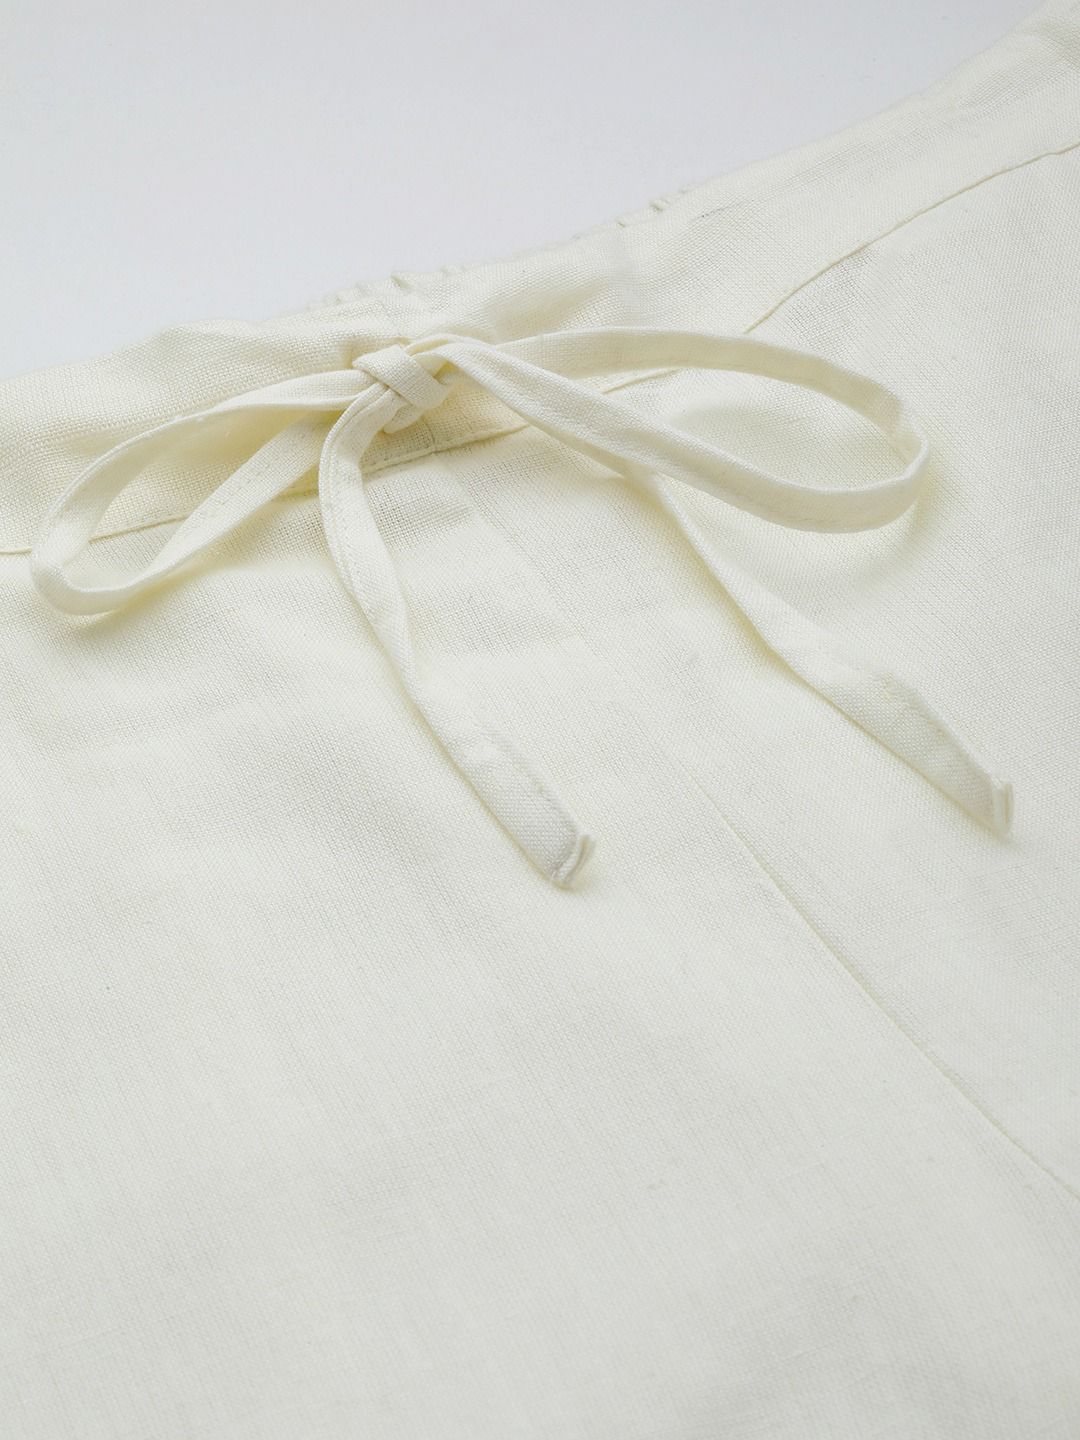 Straight Style Cotton Fabric Off White Color Trouser